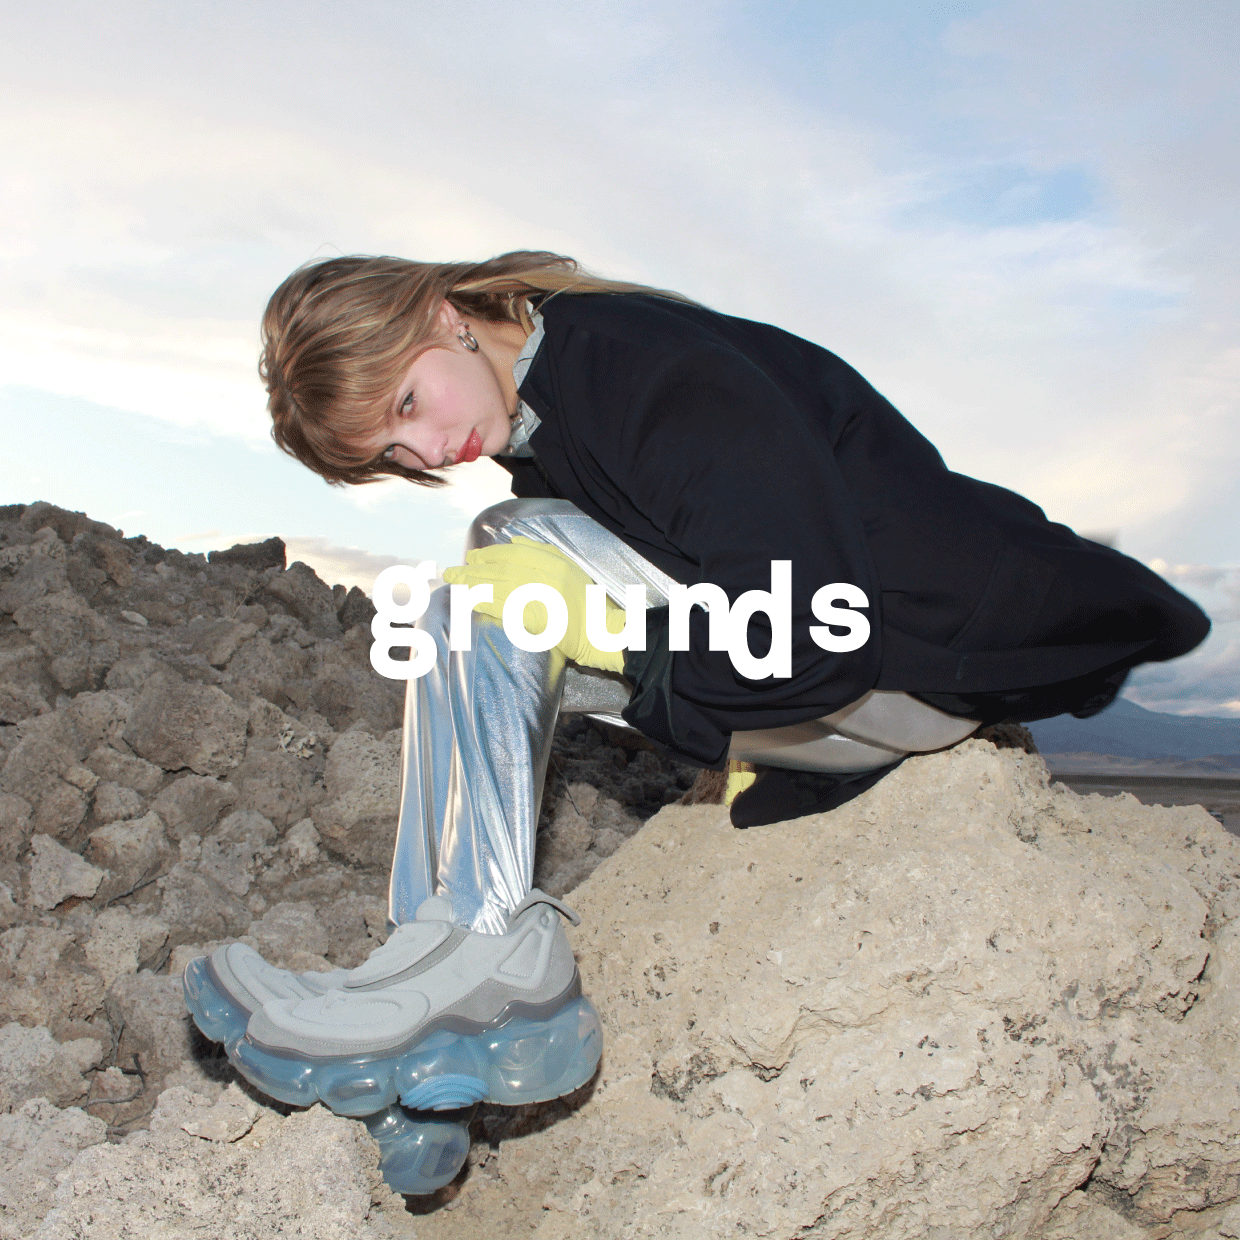 grounds POP UP STORE